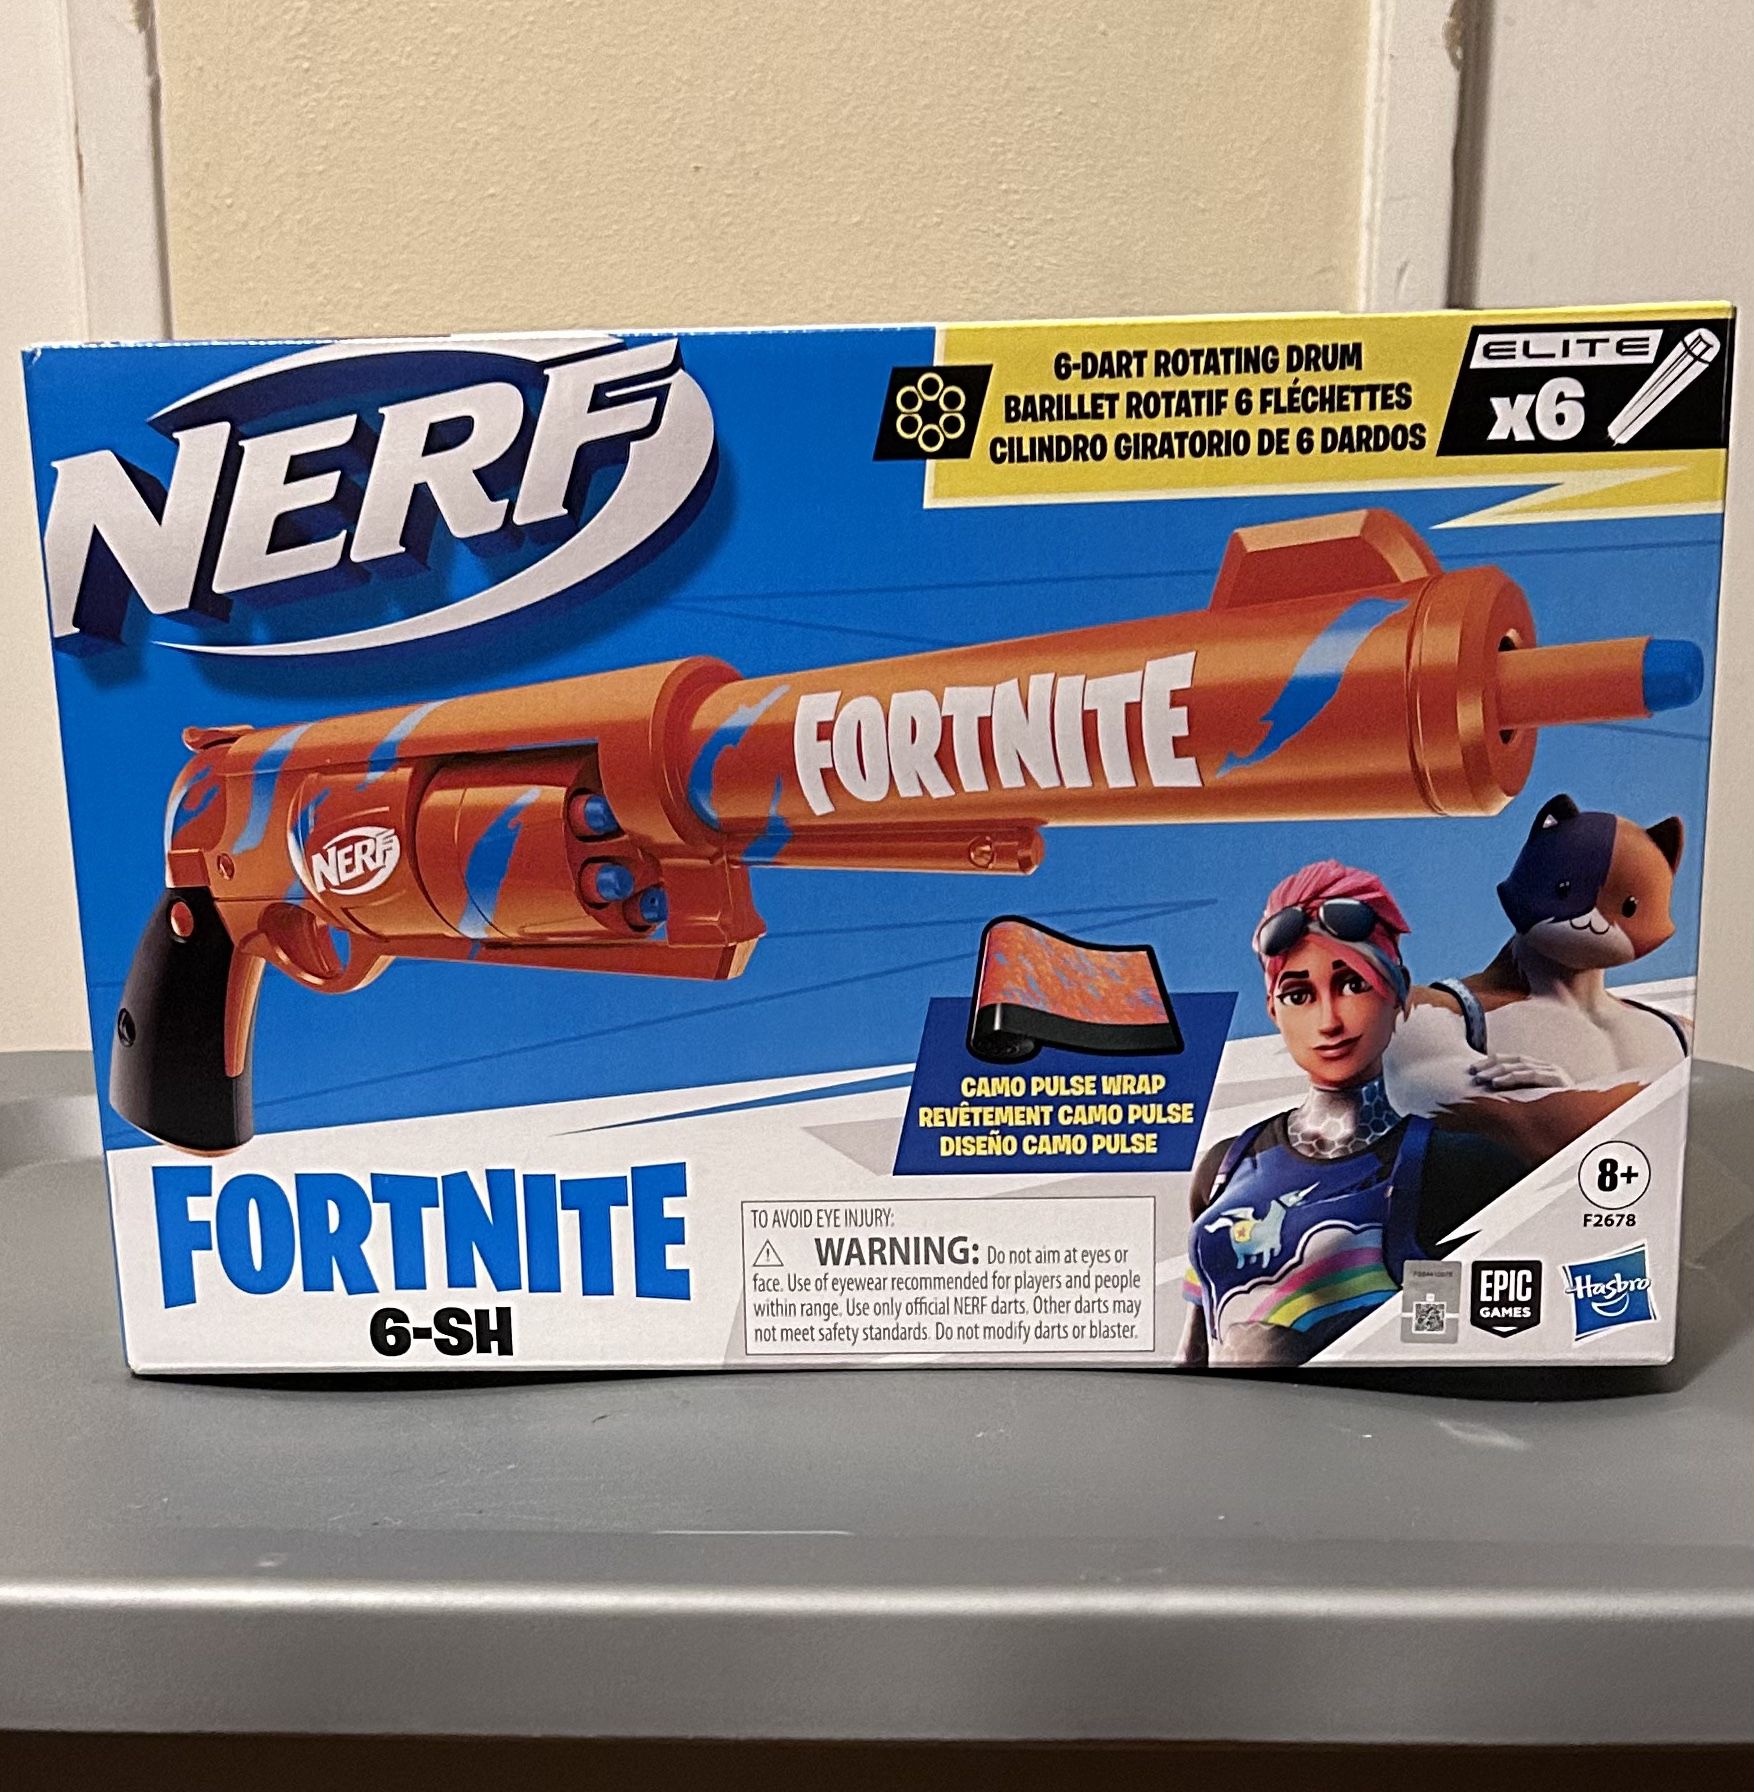 Nerf Fortnite 6-SH Rotating Drum Kids Toy Blaster for Boys and Girls with 6 Darts